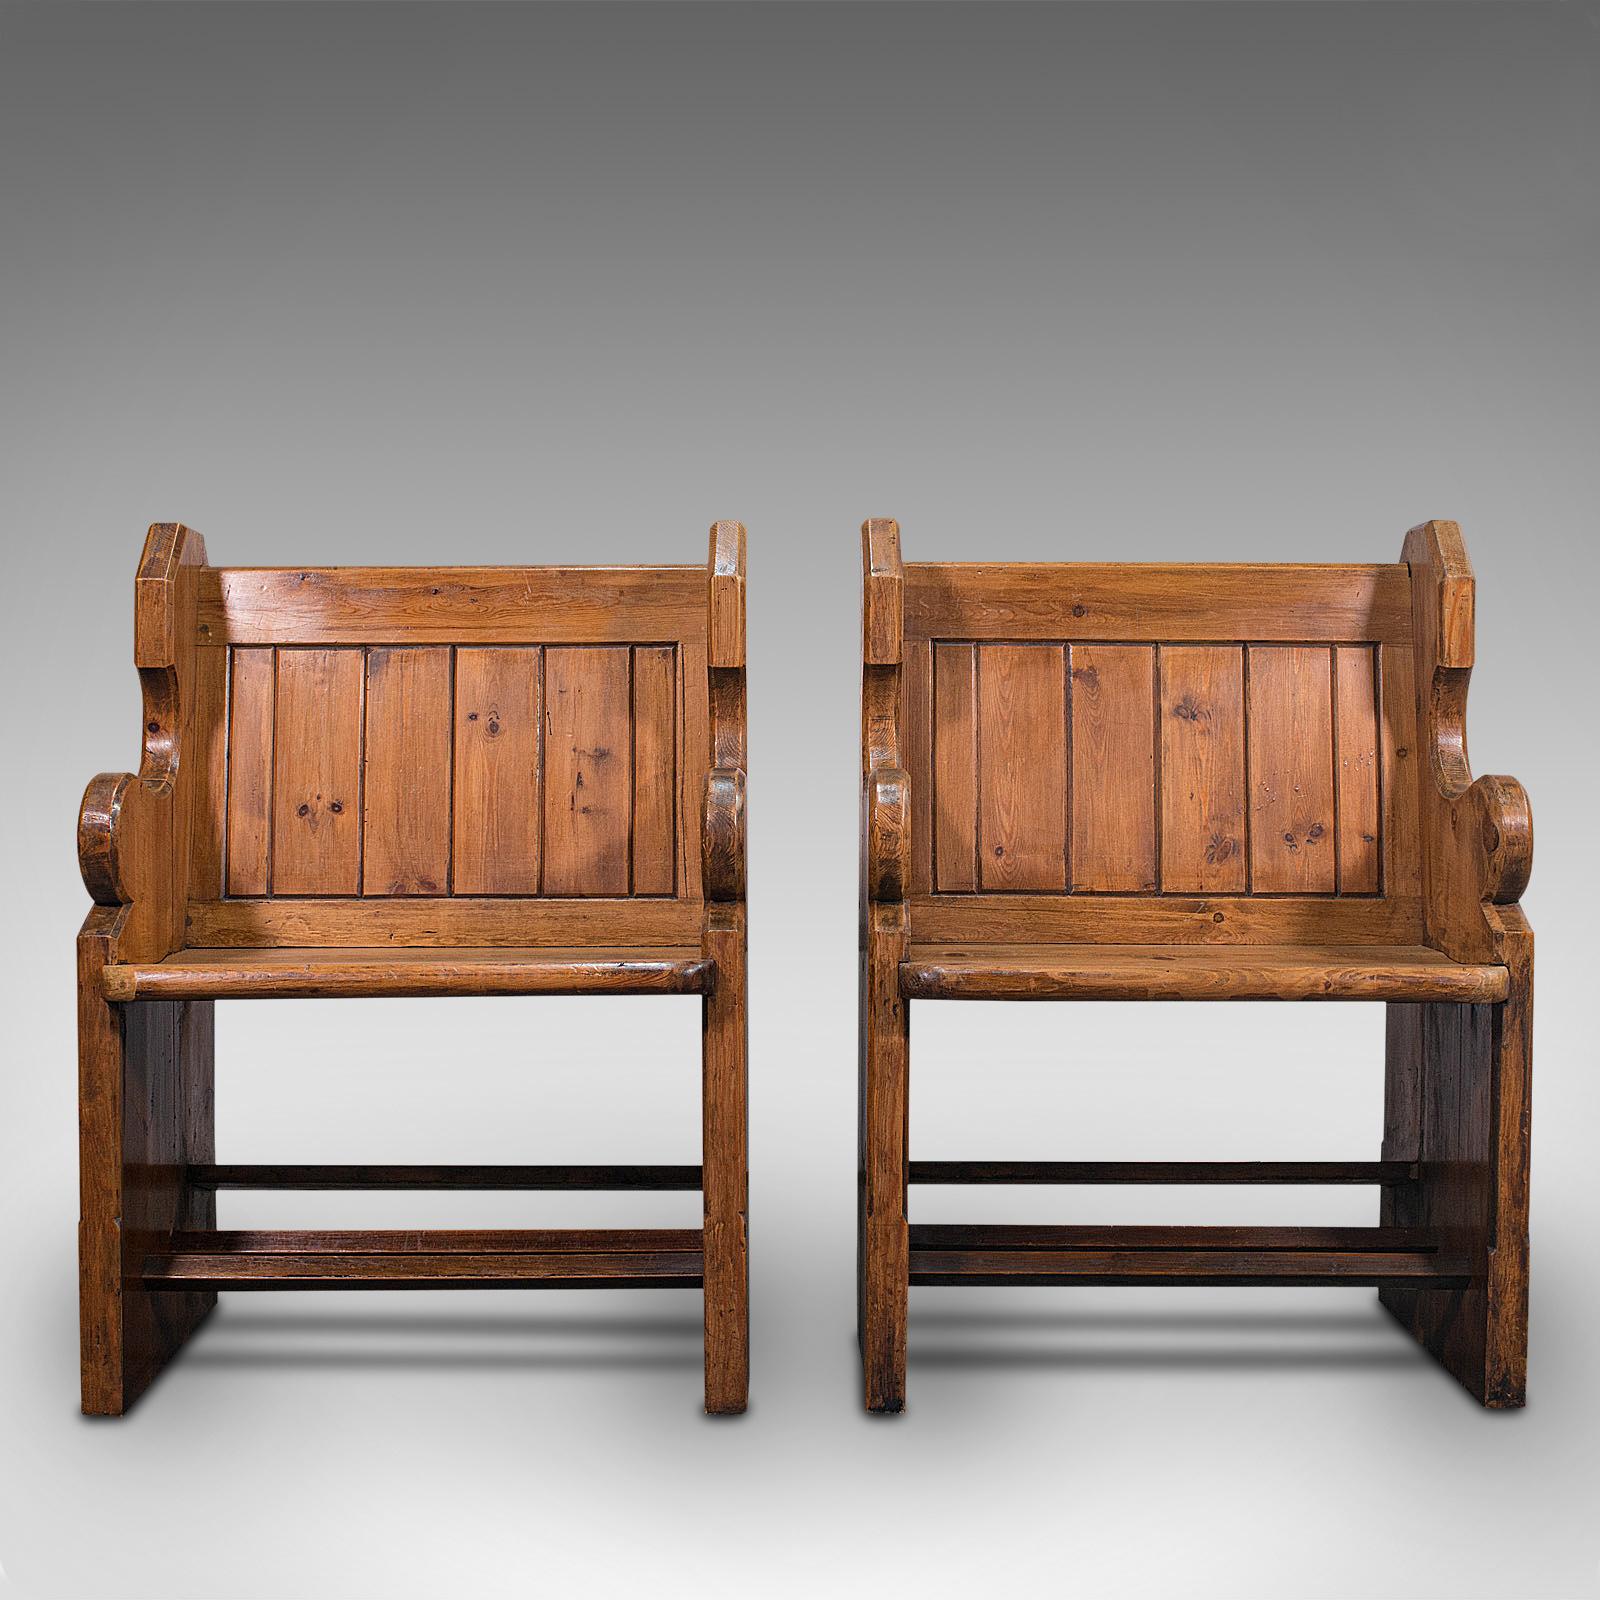 This is a pair of antique hall seats. An English, pine reception or conservatory chair, dating to the late Victorian period, circa 1900.

Spend quality time relaxing with this comfortable pair of seats
Displaying a desirable aged patina and in